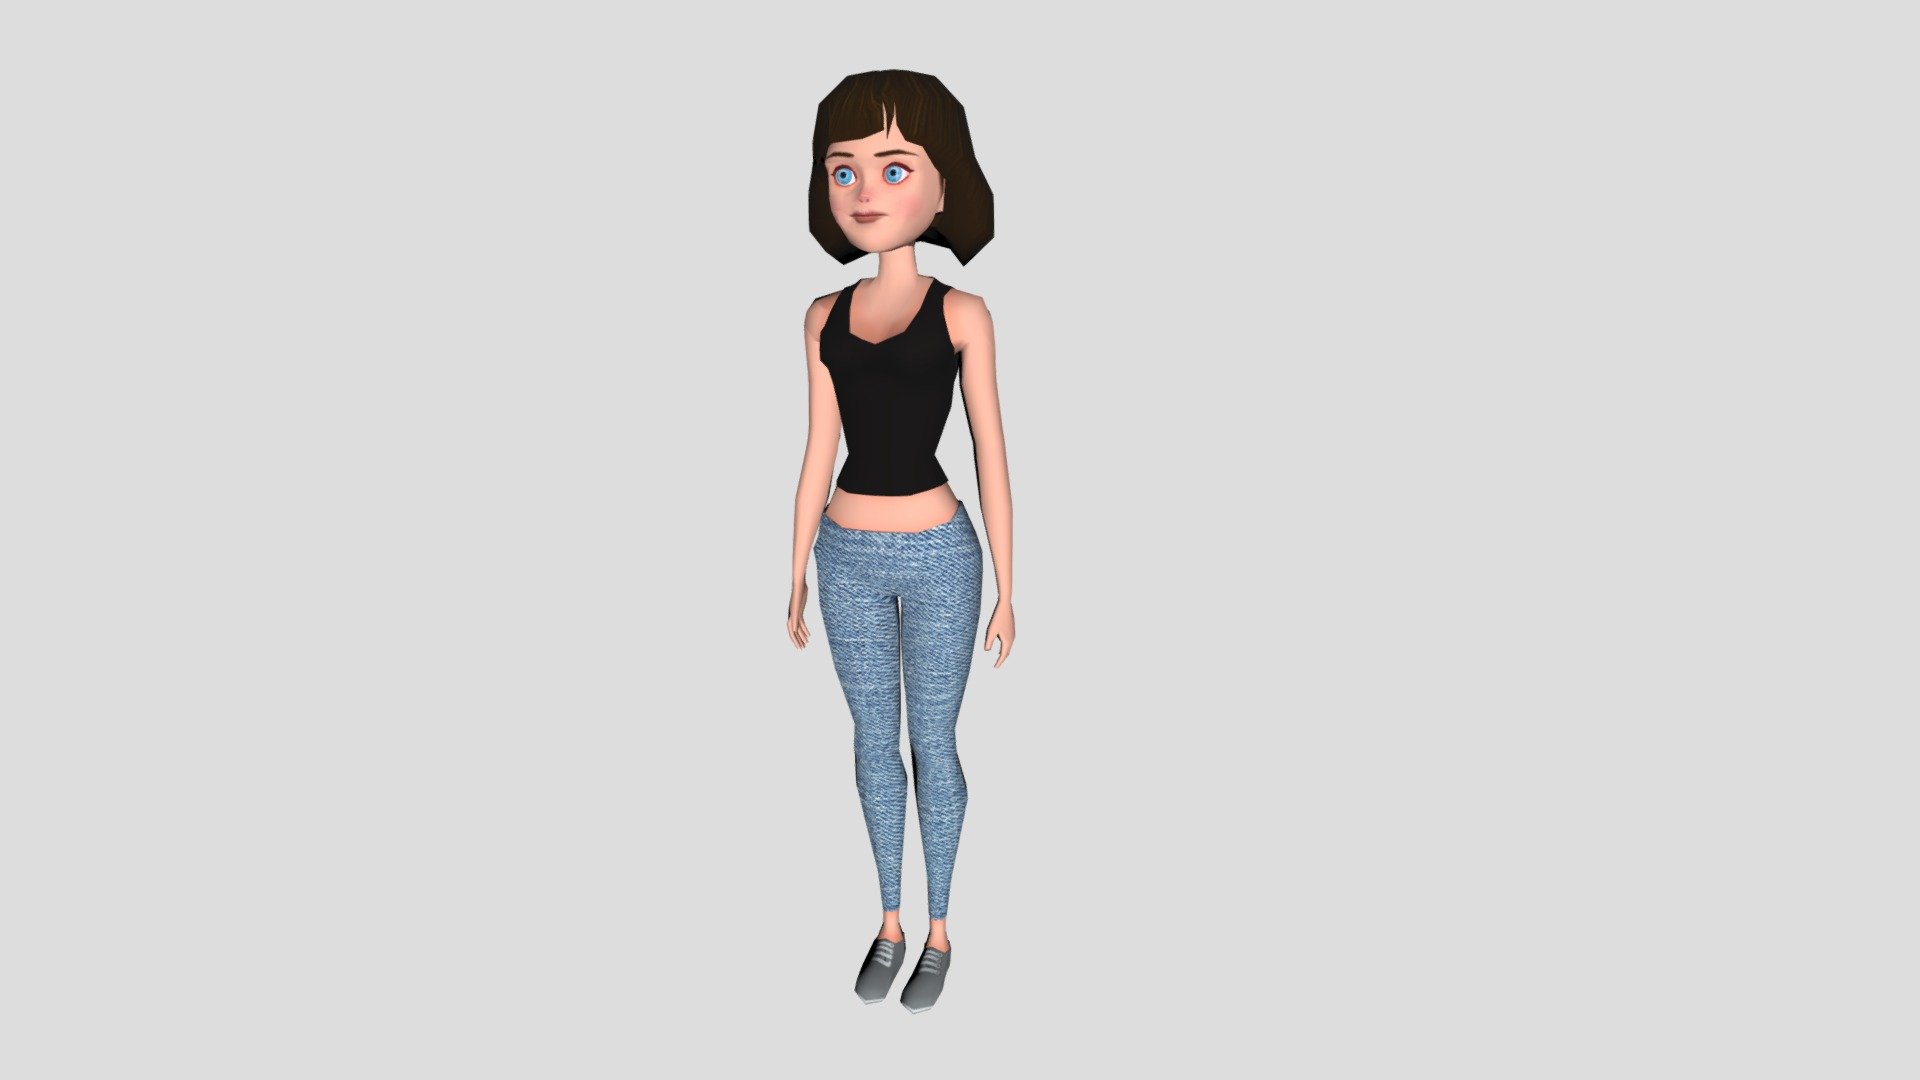 Low Poly Girl Download Free 3d Model By Biomonger [a29a999] Sketchfab